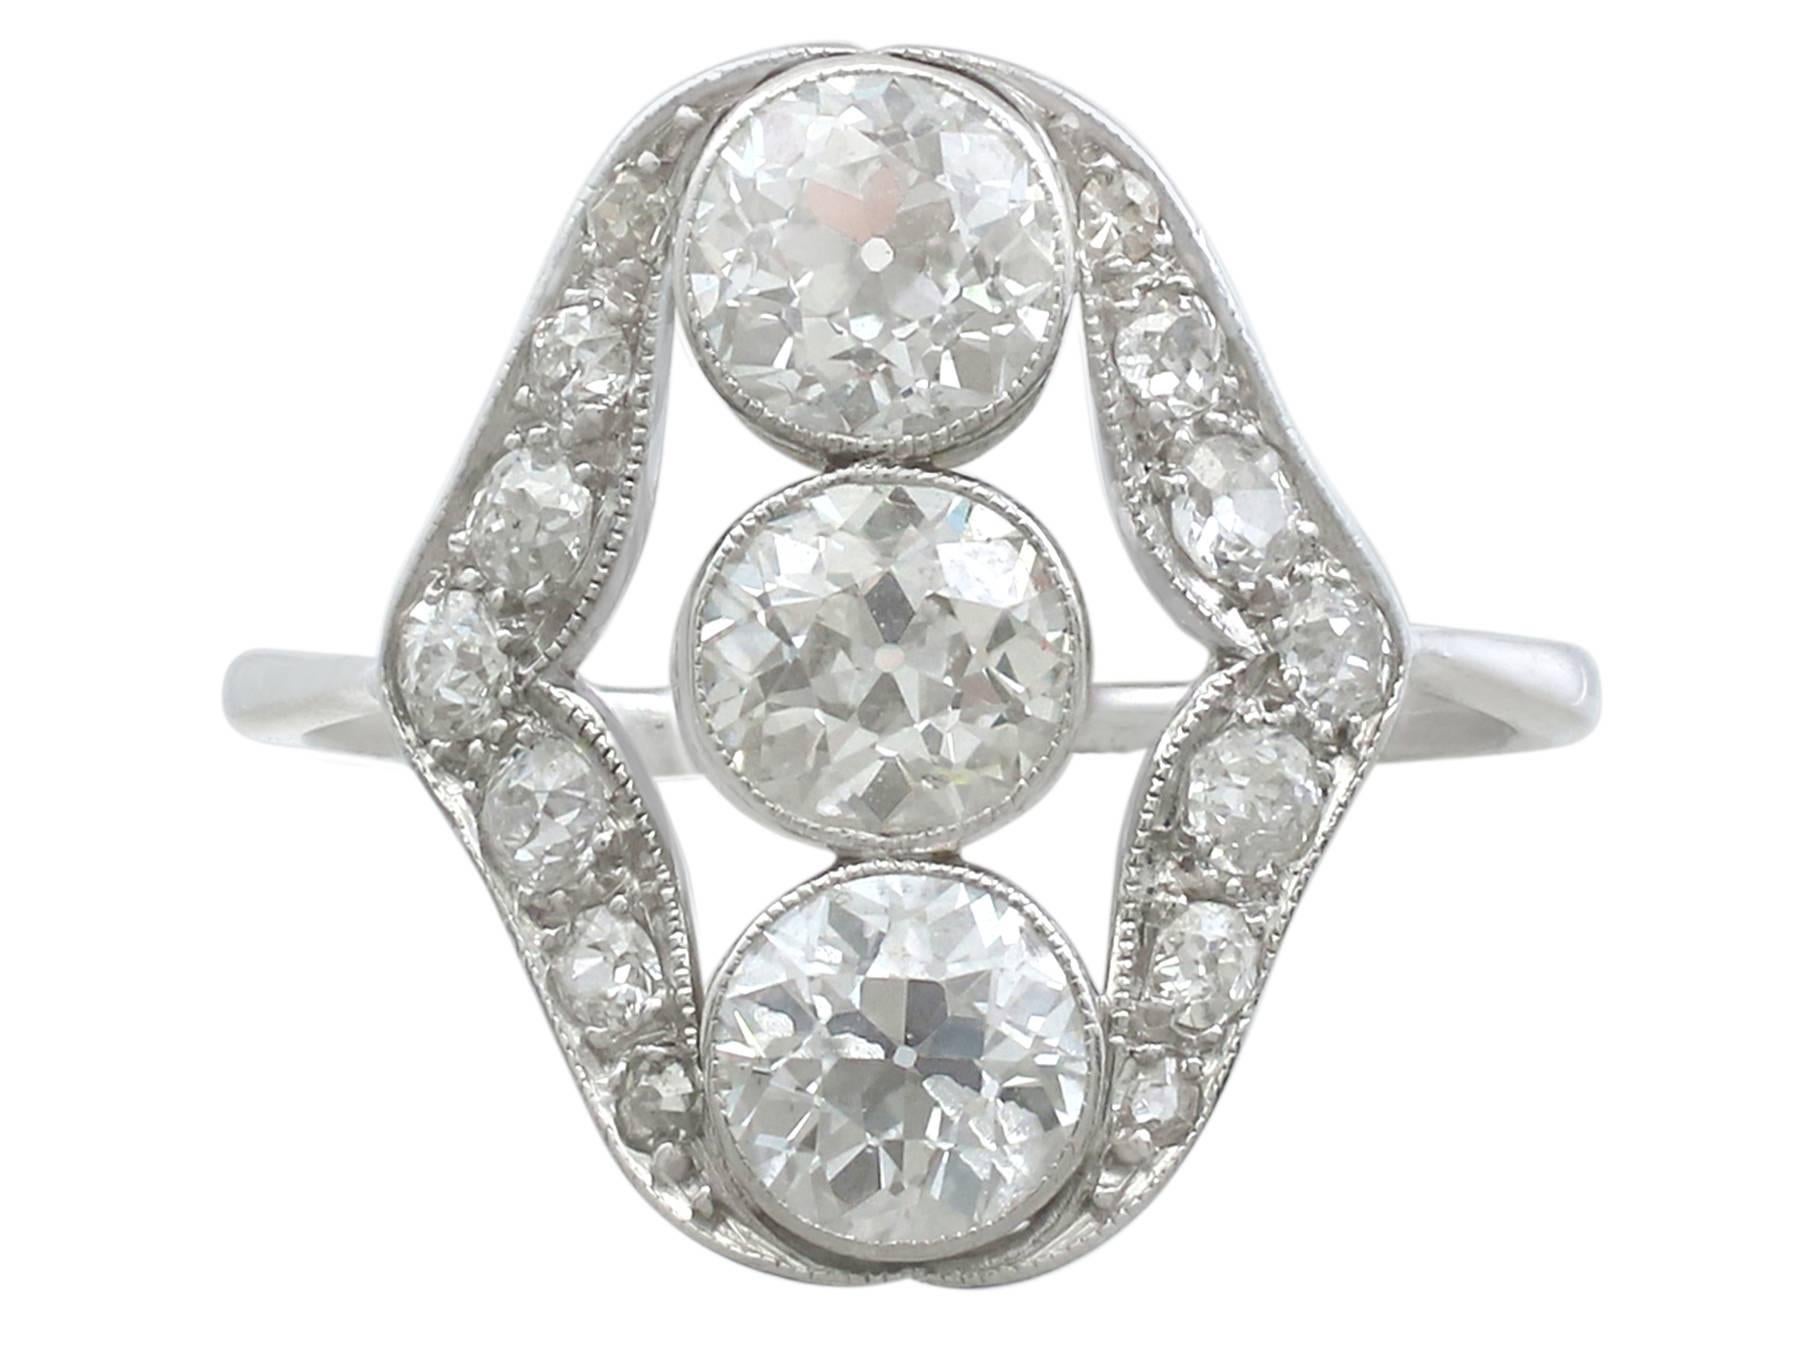 A stunning, fine and impressive antique 2.44 Ct diamond and platinum dress ring; part of our diverse antique jewelry and estate jewelry collections

This stunning, fine and impressive antique diamond ring has been crafted in platinum.

The pierced